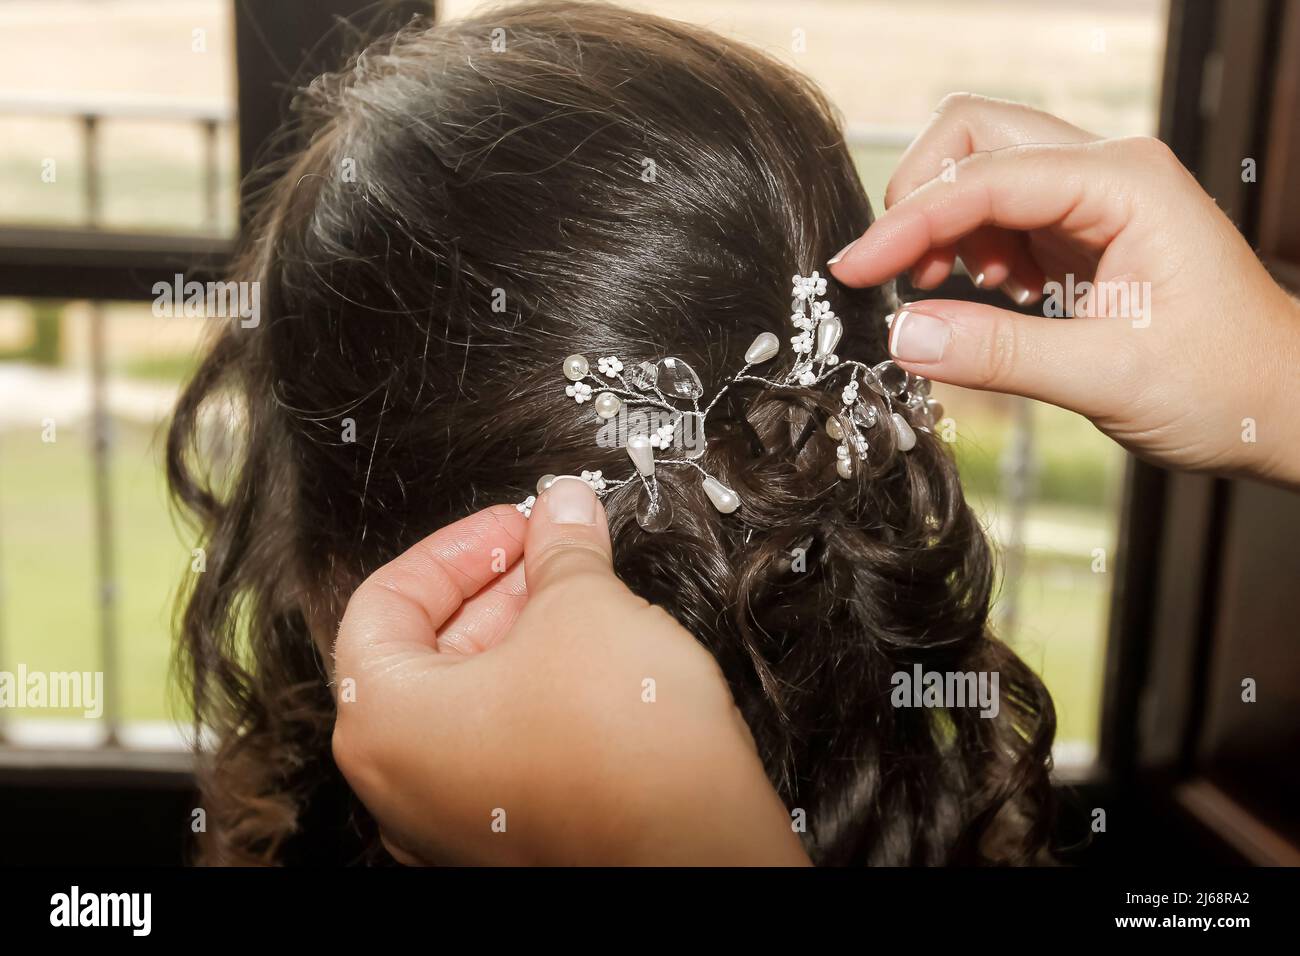 Nice hair ornament that is placed on the head of a woman with dark hair. Stock Photo